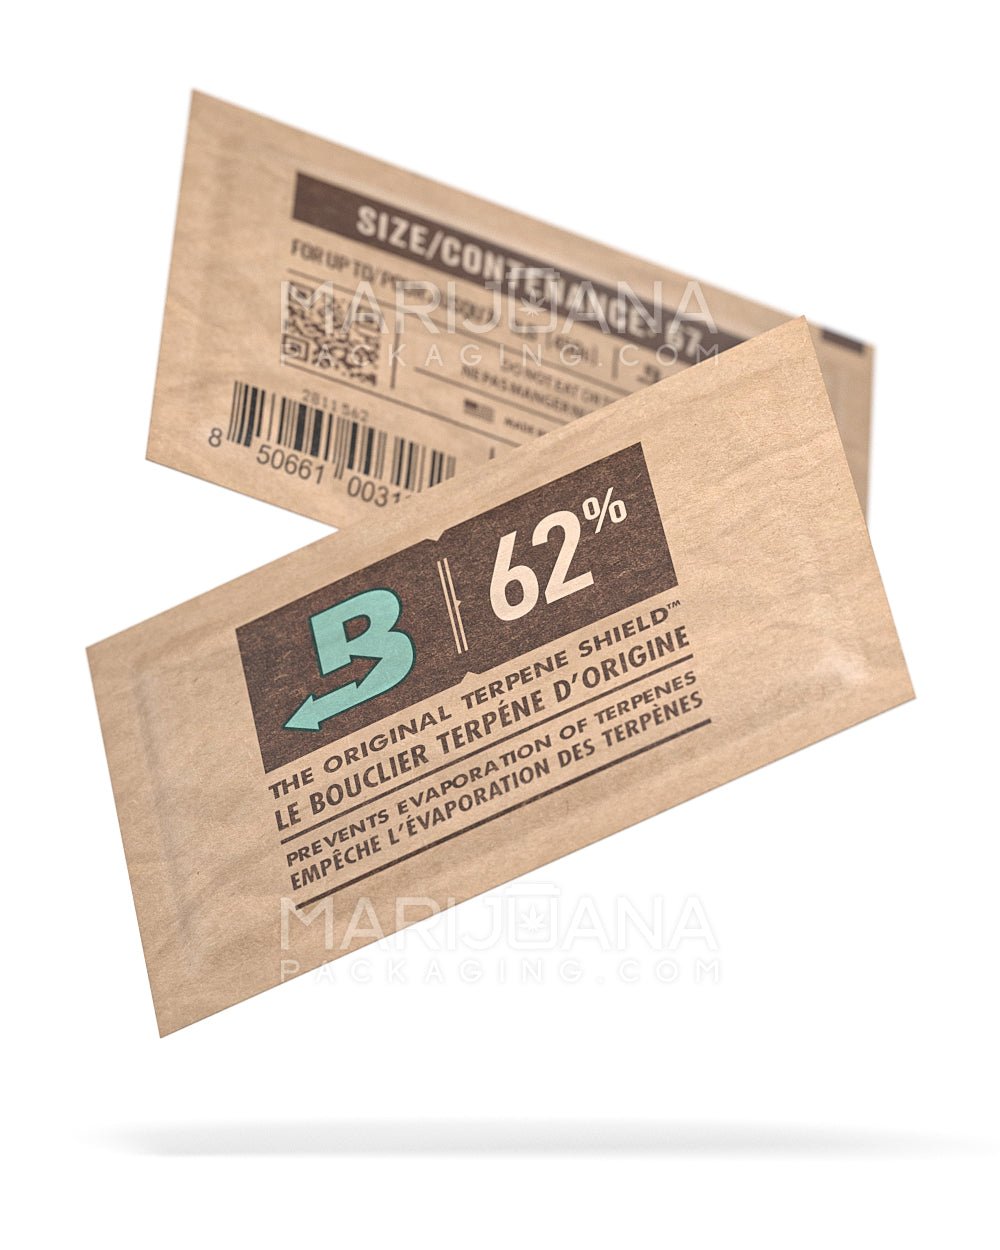 BOVEDA | Humidity Control Packs | 67 Grams - 62% - 100 Count - 6